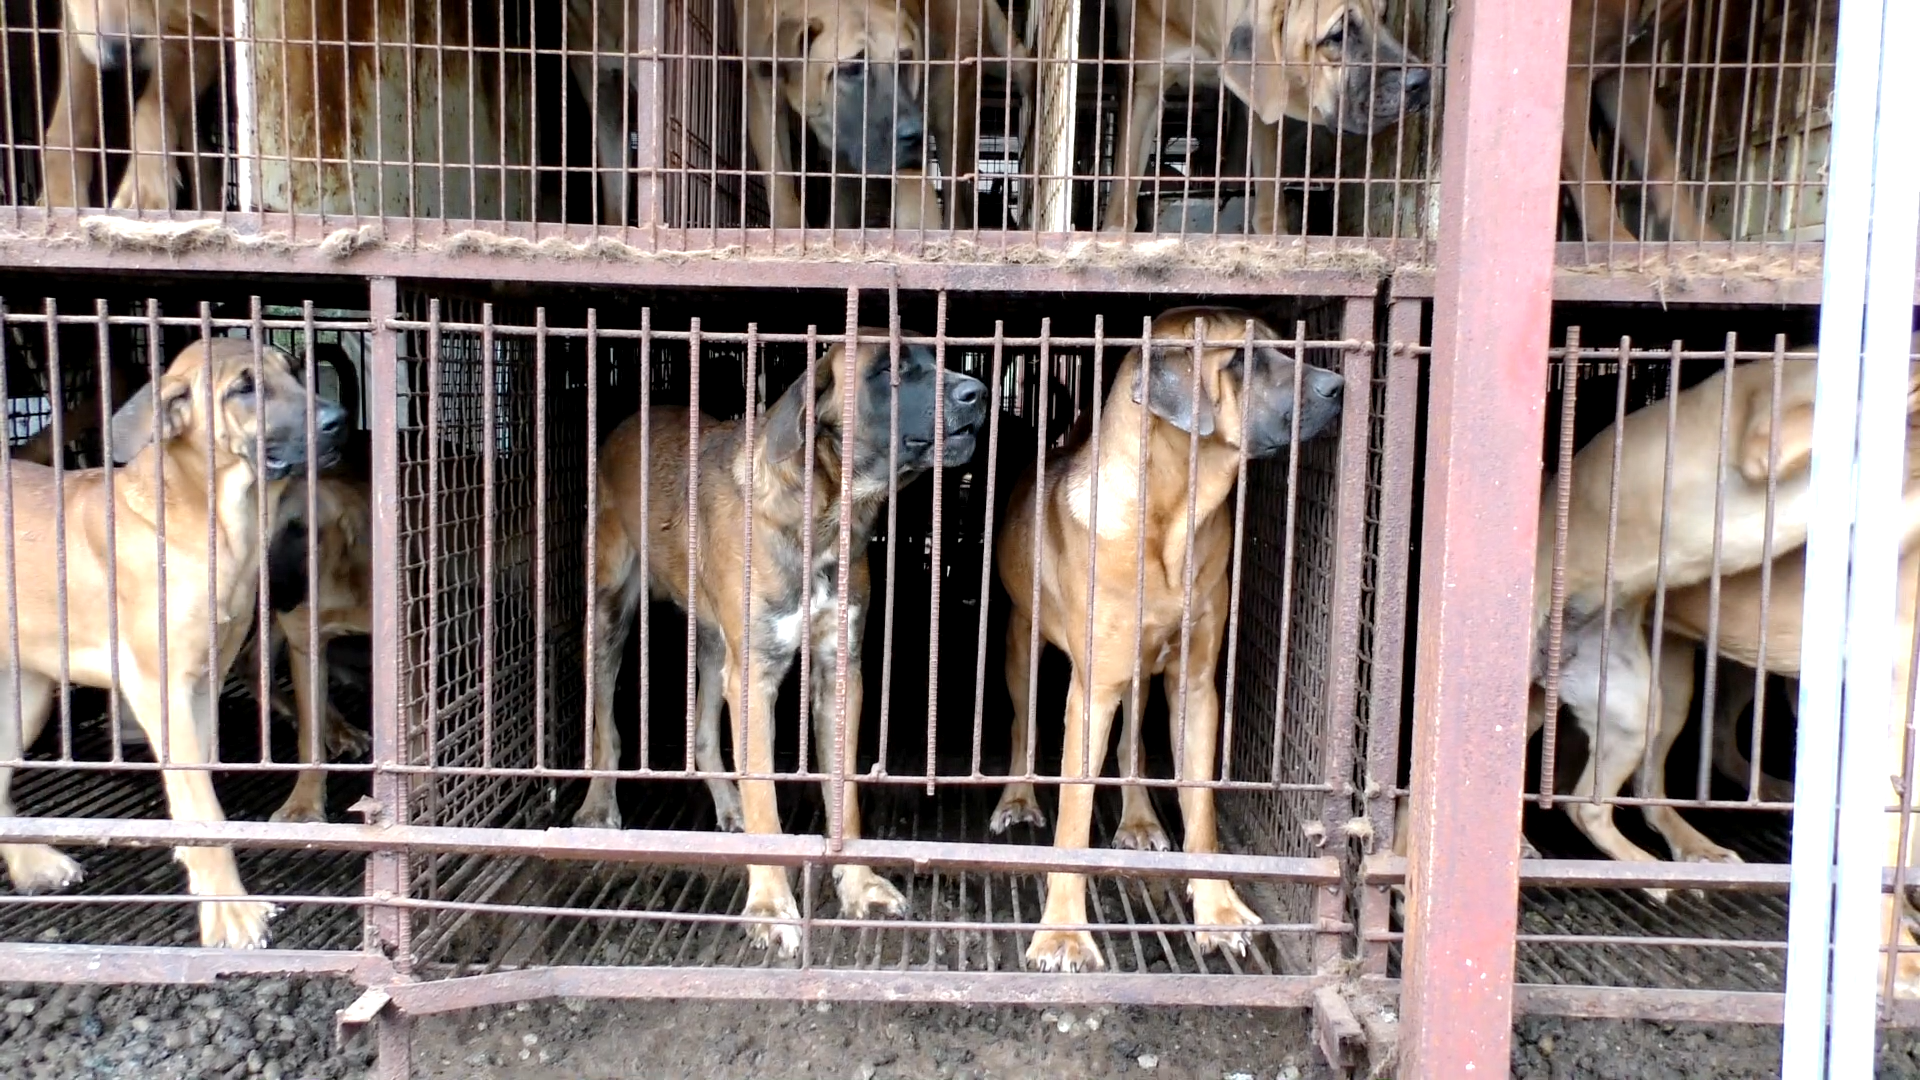 Royal Canin: Speak out against the dog meat trade operating outside your facility in Korea!